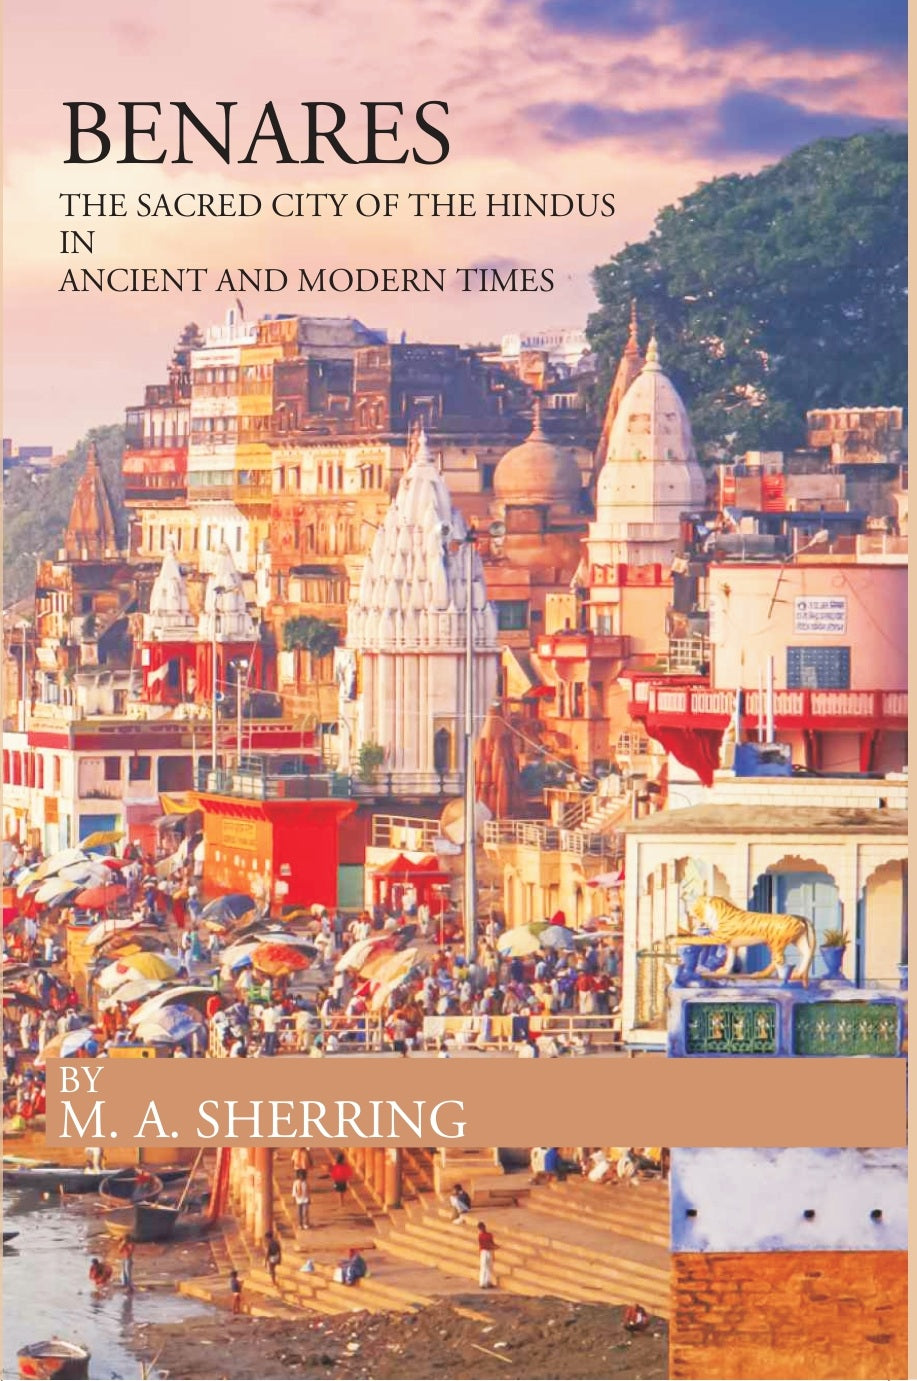 BENARES THE SACRED CITY OF THE HINDUS IN ANCIENT AND MODERN TIMES